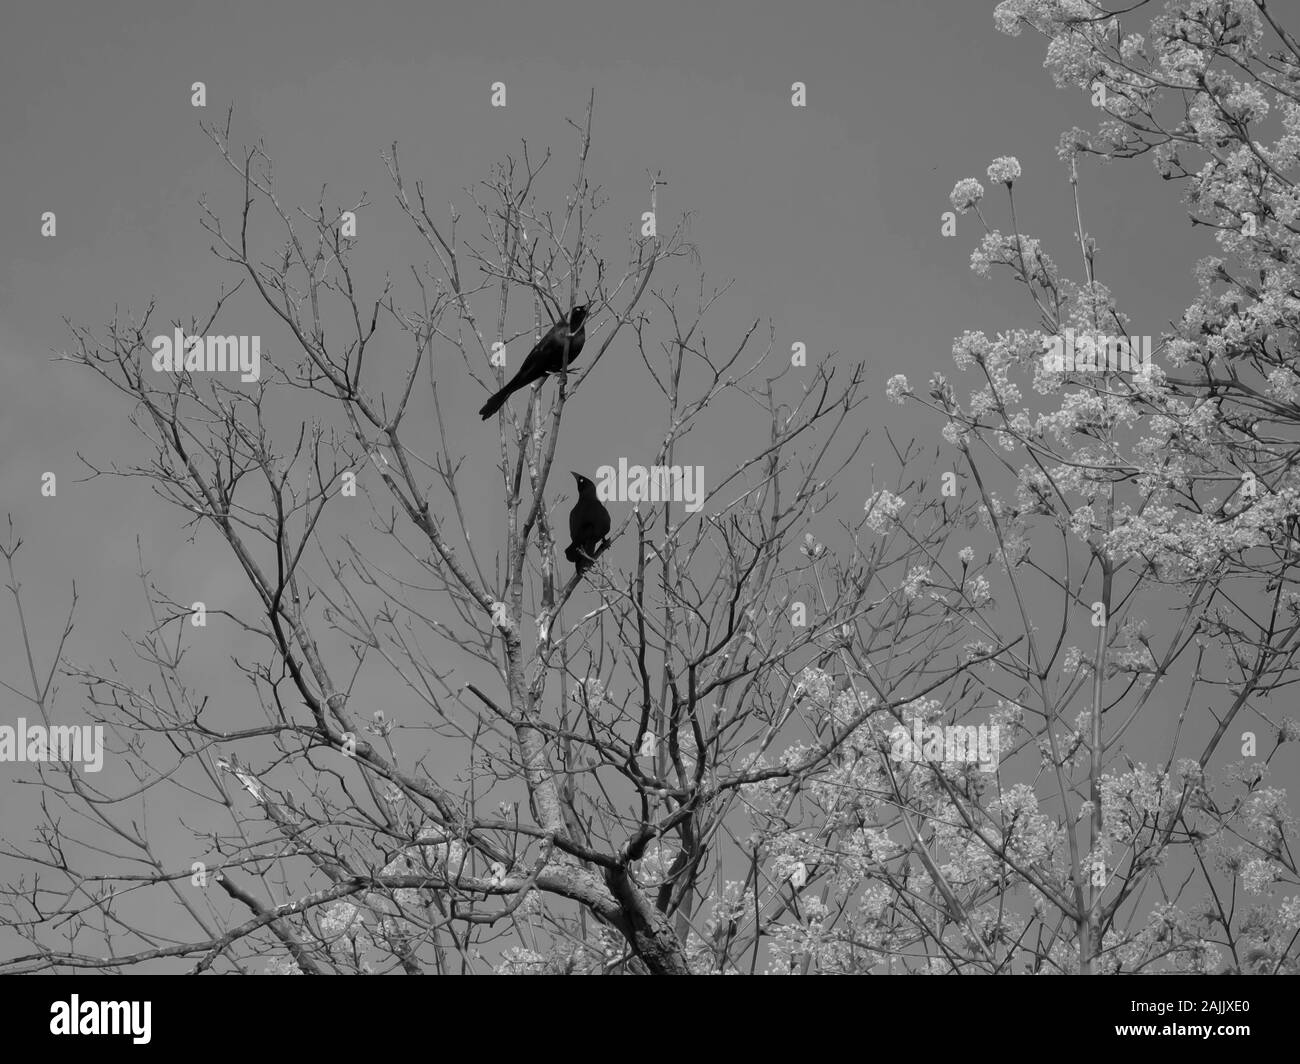 Black and White Photo of Two Black Crows Perched on Tree Branches Stock Photo